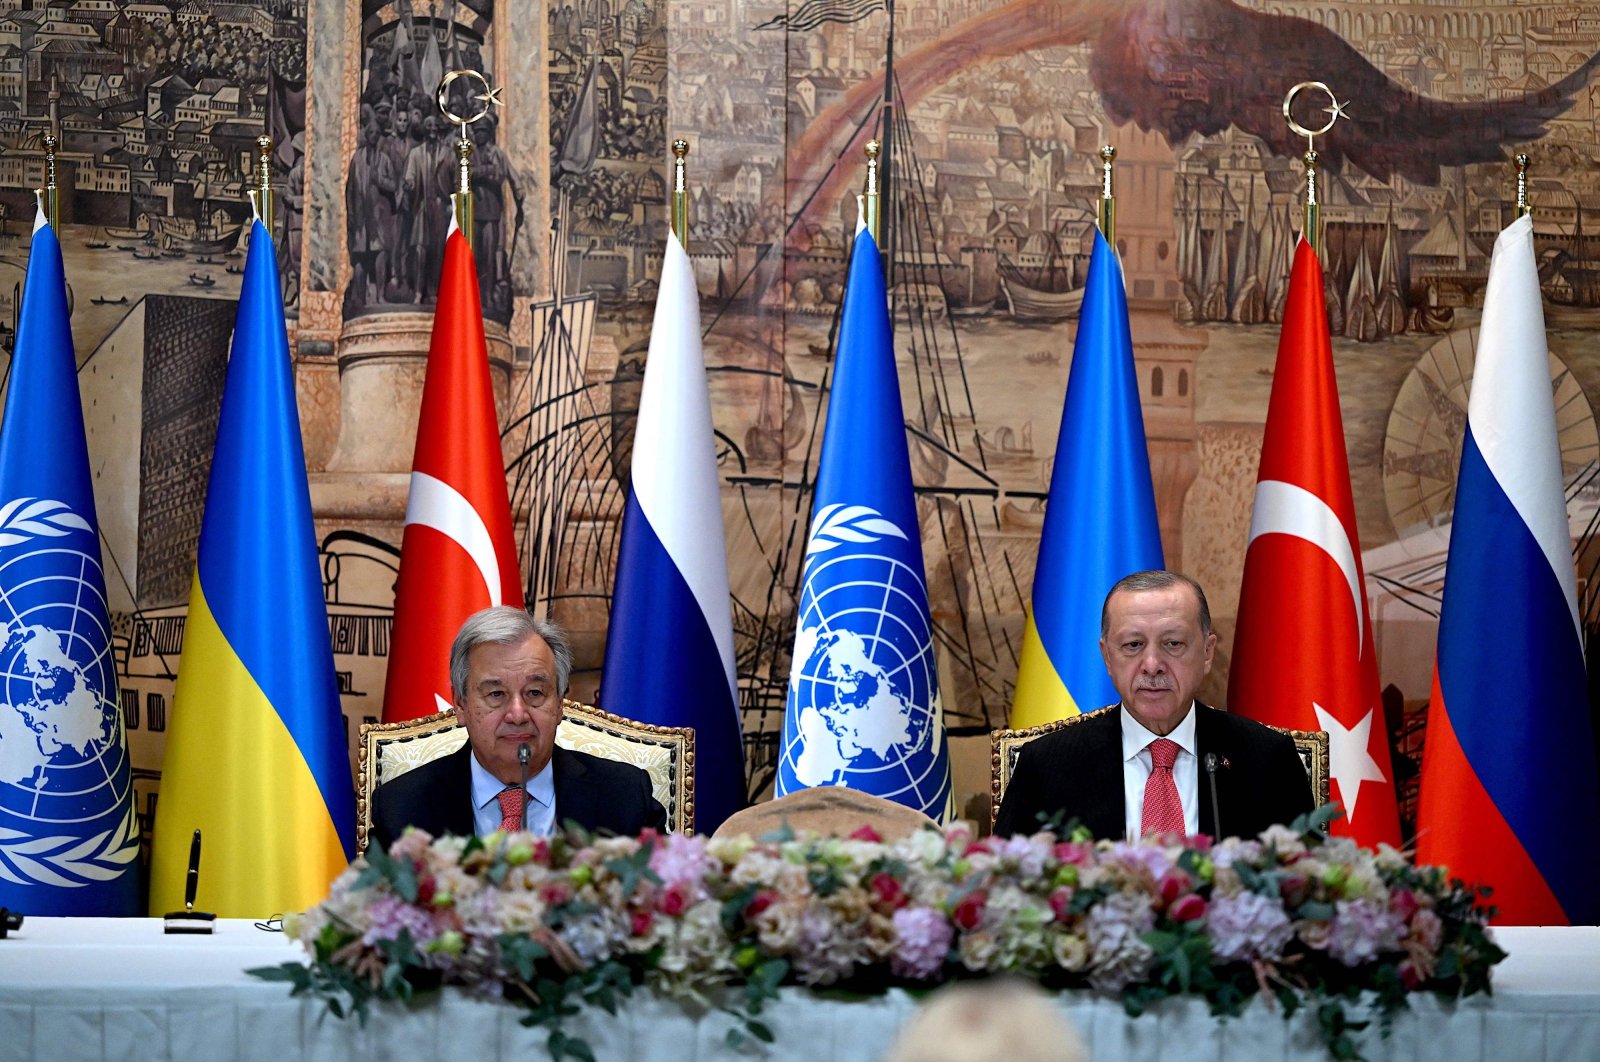 President Recep Tayyip Erdoğan and U.N. Secretary-General Antonio Guterres (L) sit at the start of the signature ceremony of an initiative on the safe transportation of grain and foodstuffs from Ukrainian ports, in Istanbul, Turkey, July 22, 2022. (AFP Photo)